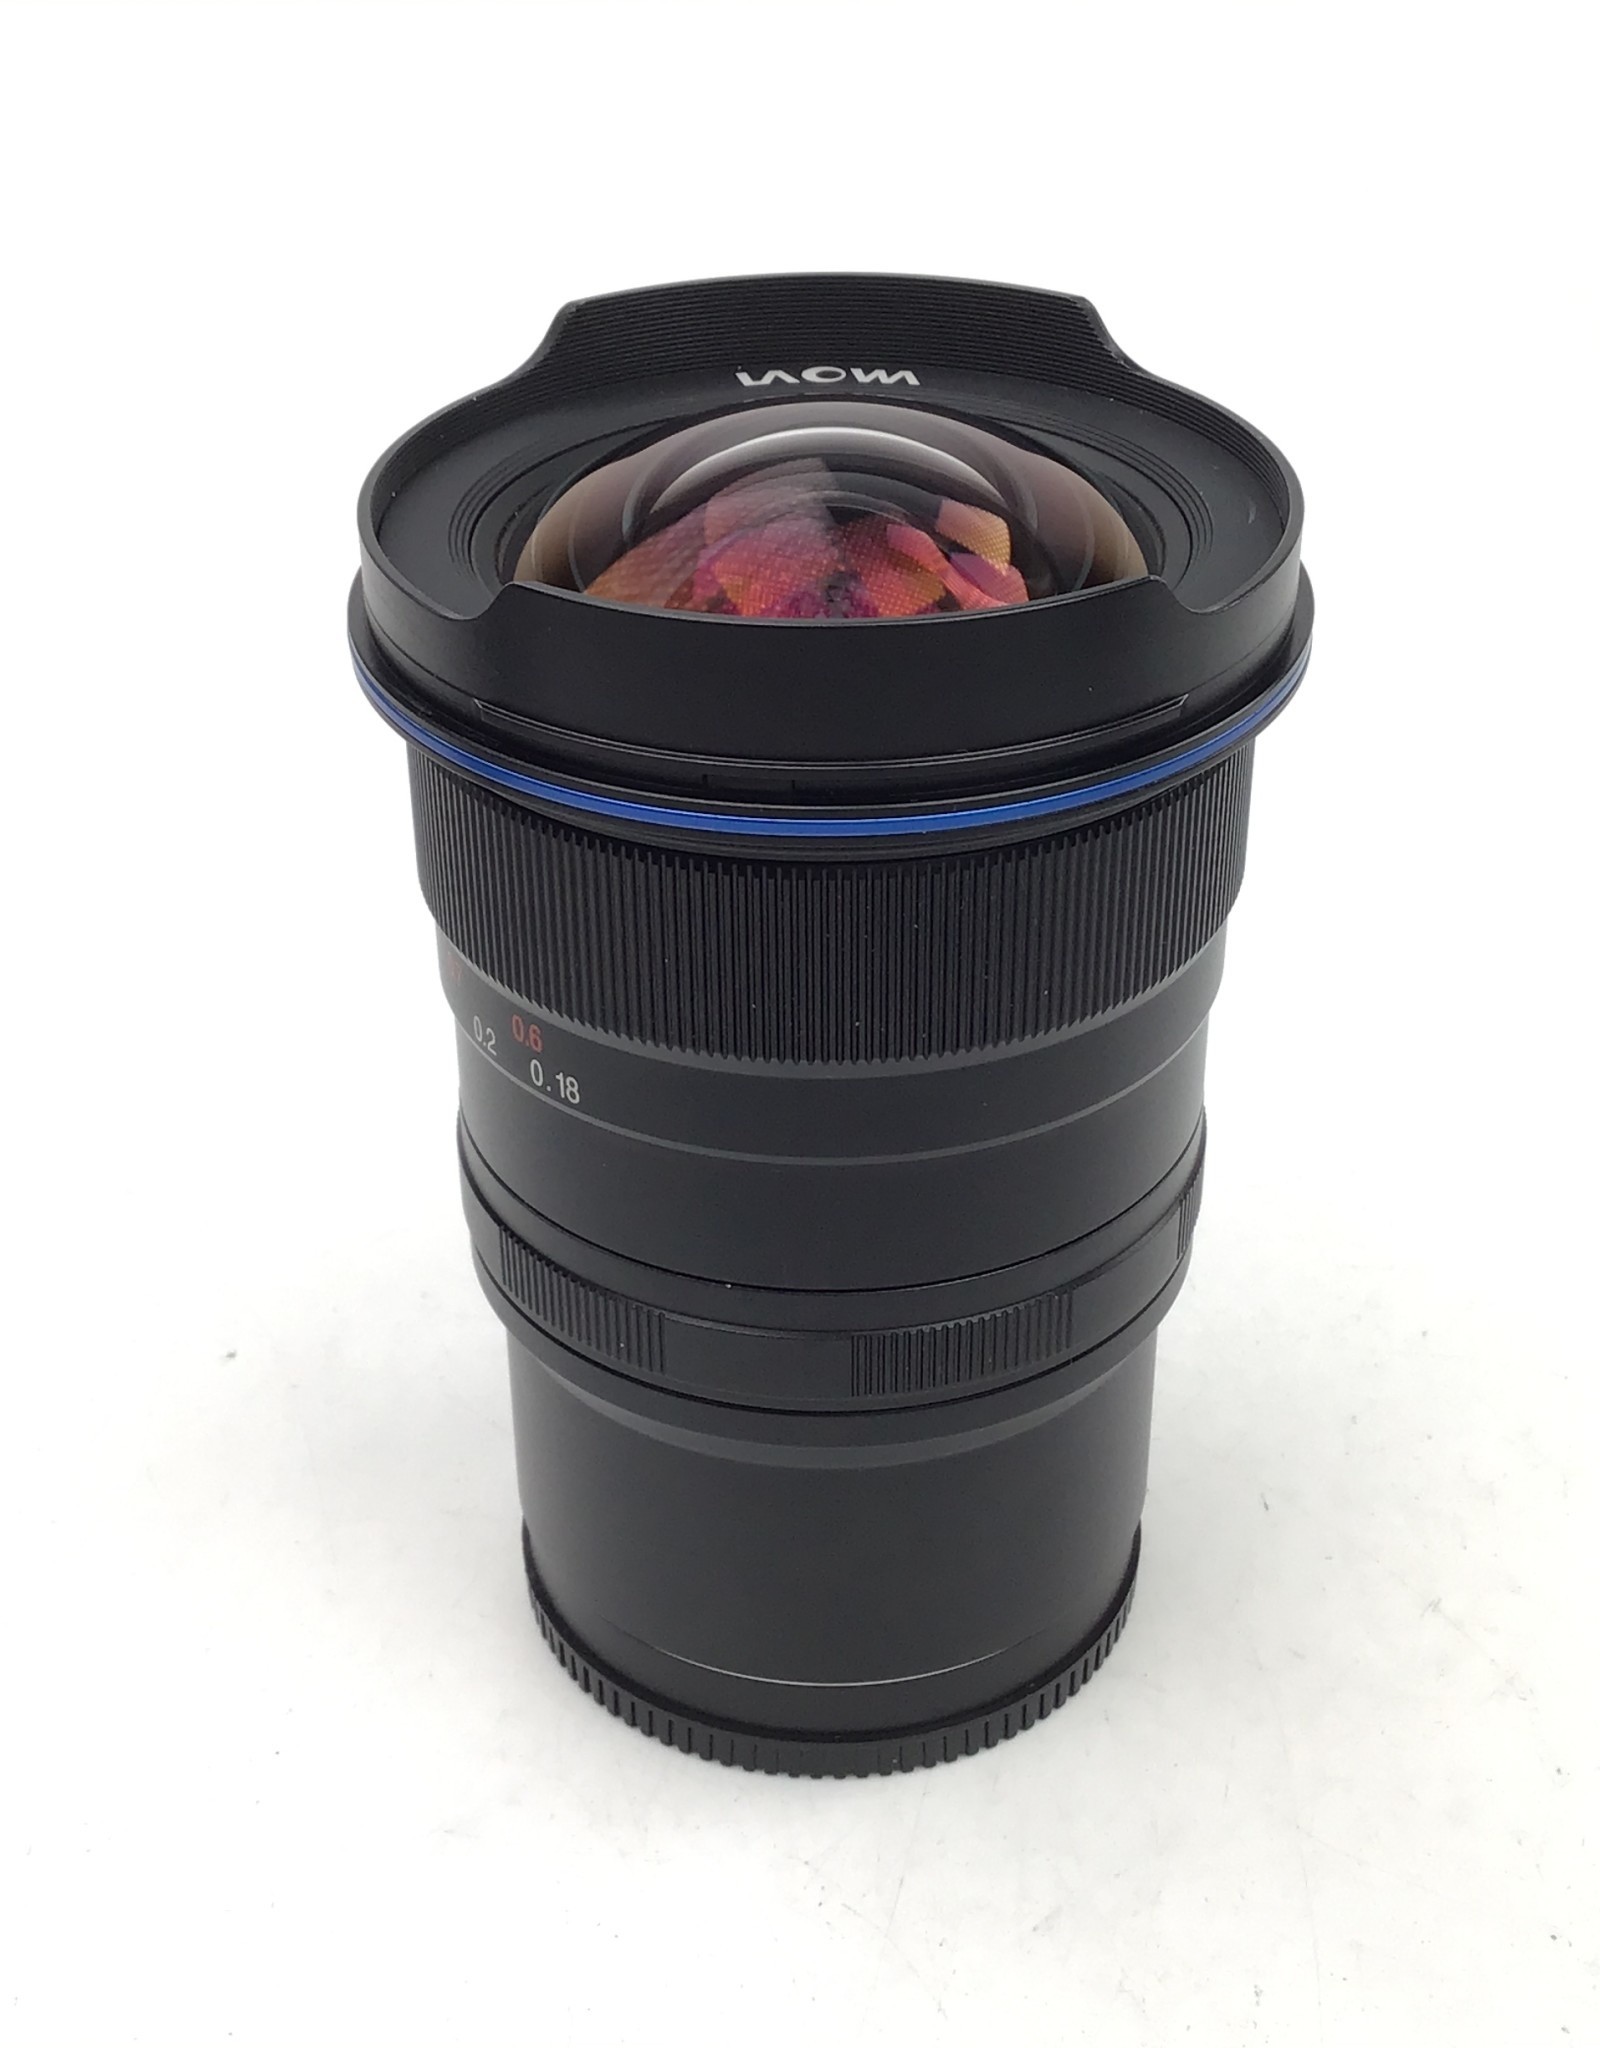 Laowa 12mm f2.8 D-Dreamer for Sony Used Good